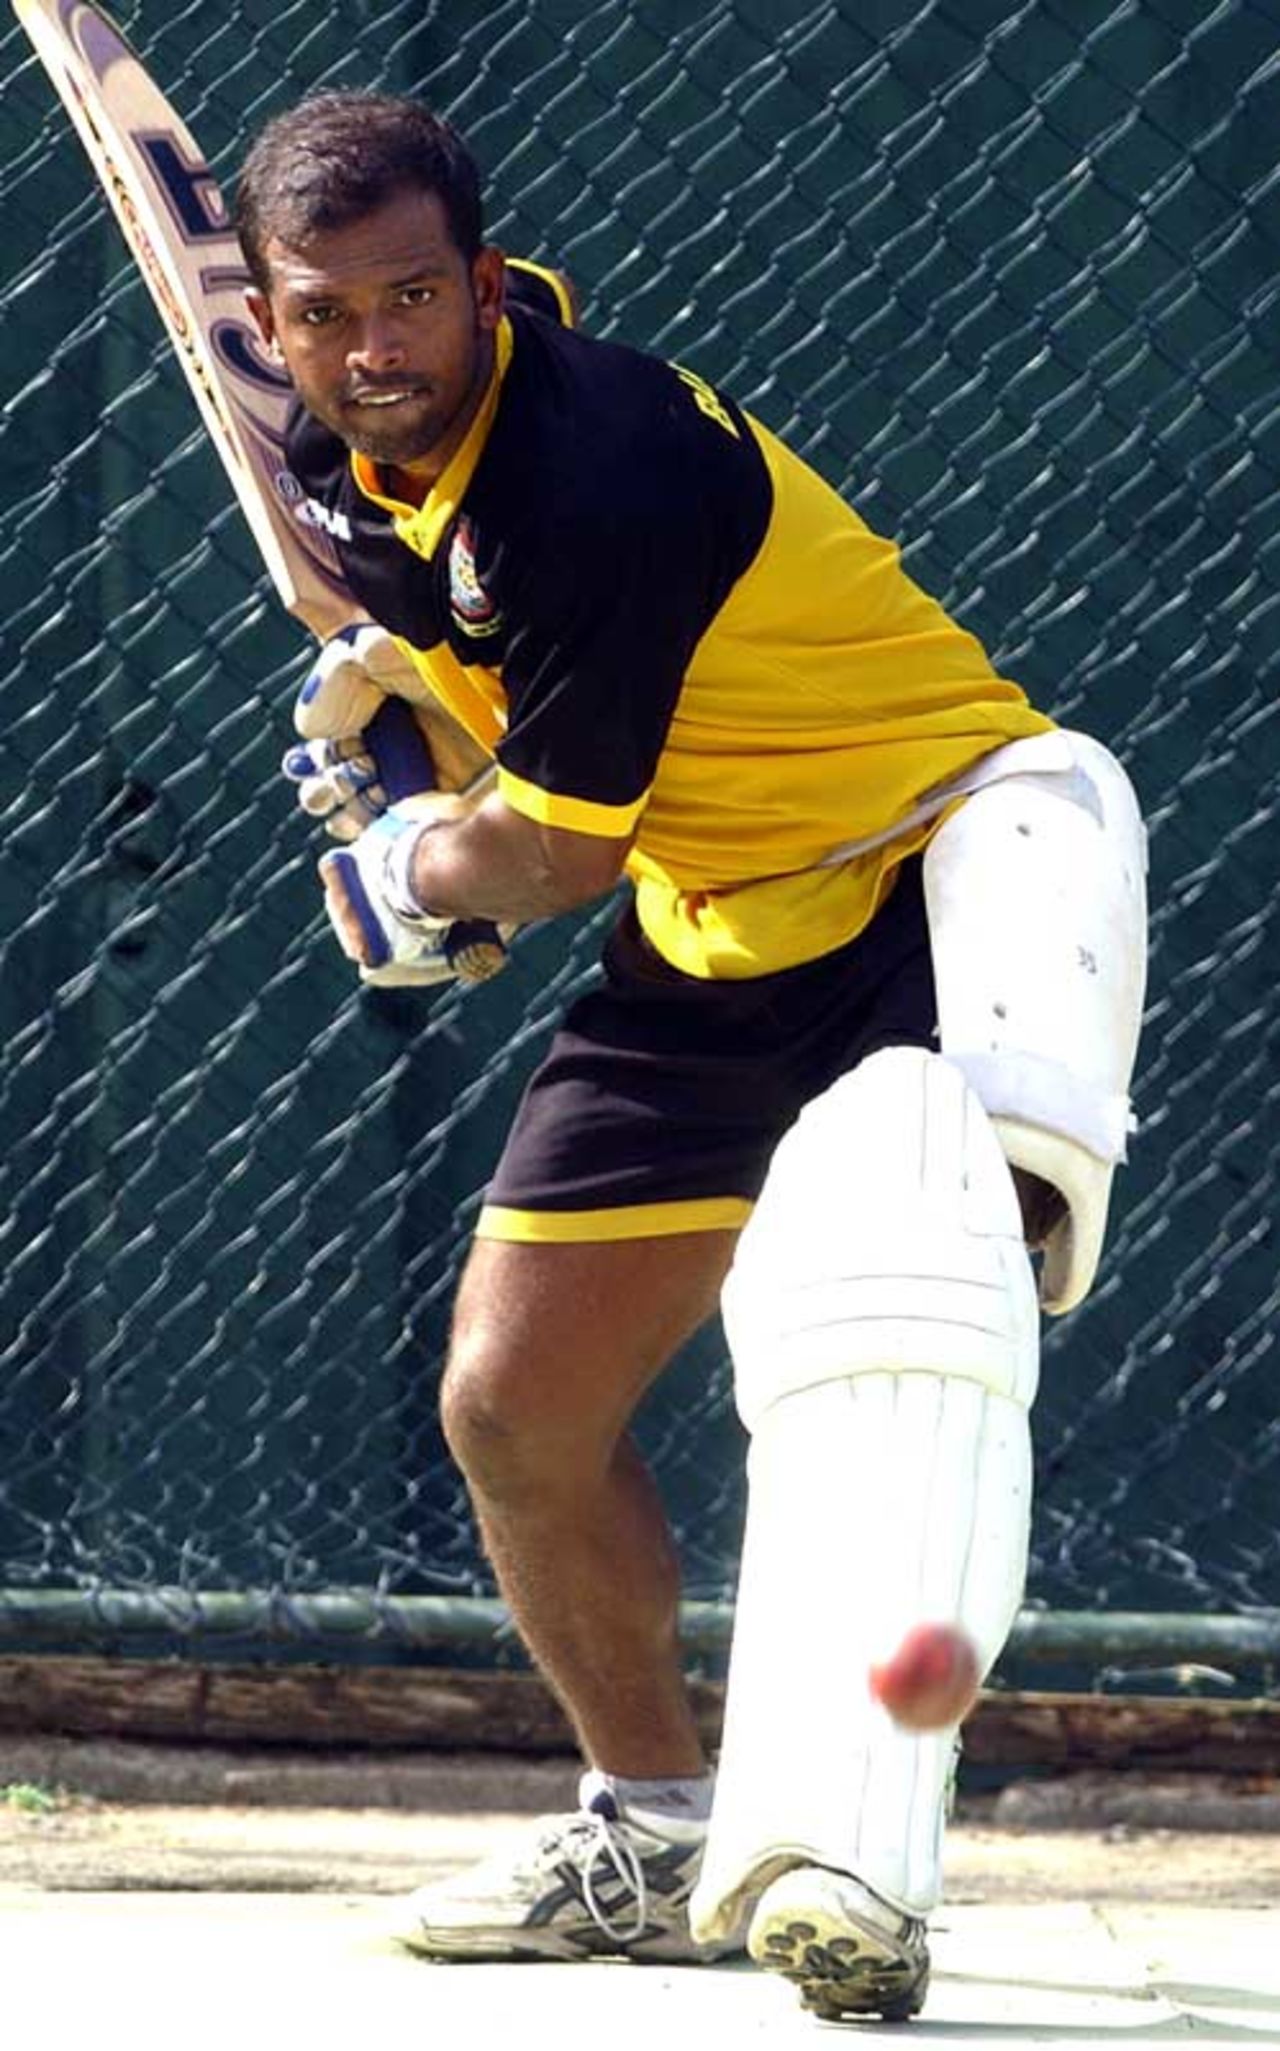 Rajin Saleh watches the ball while getting in line to play a shot during practice at Sinhalese Sports Club, Colombo, June 24, 2007